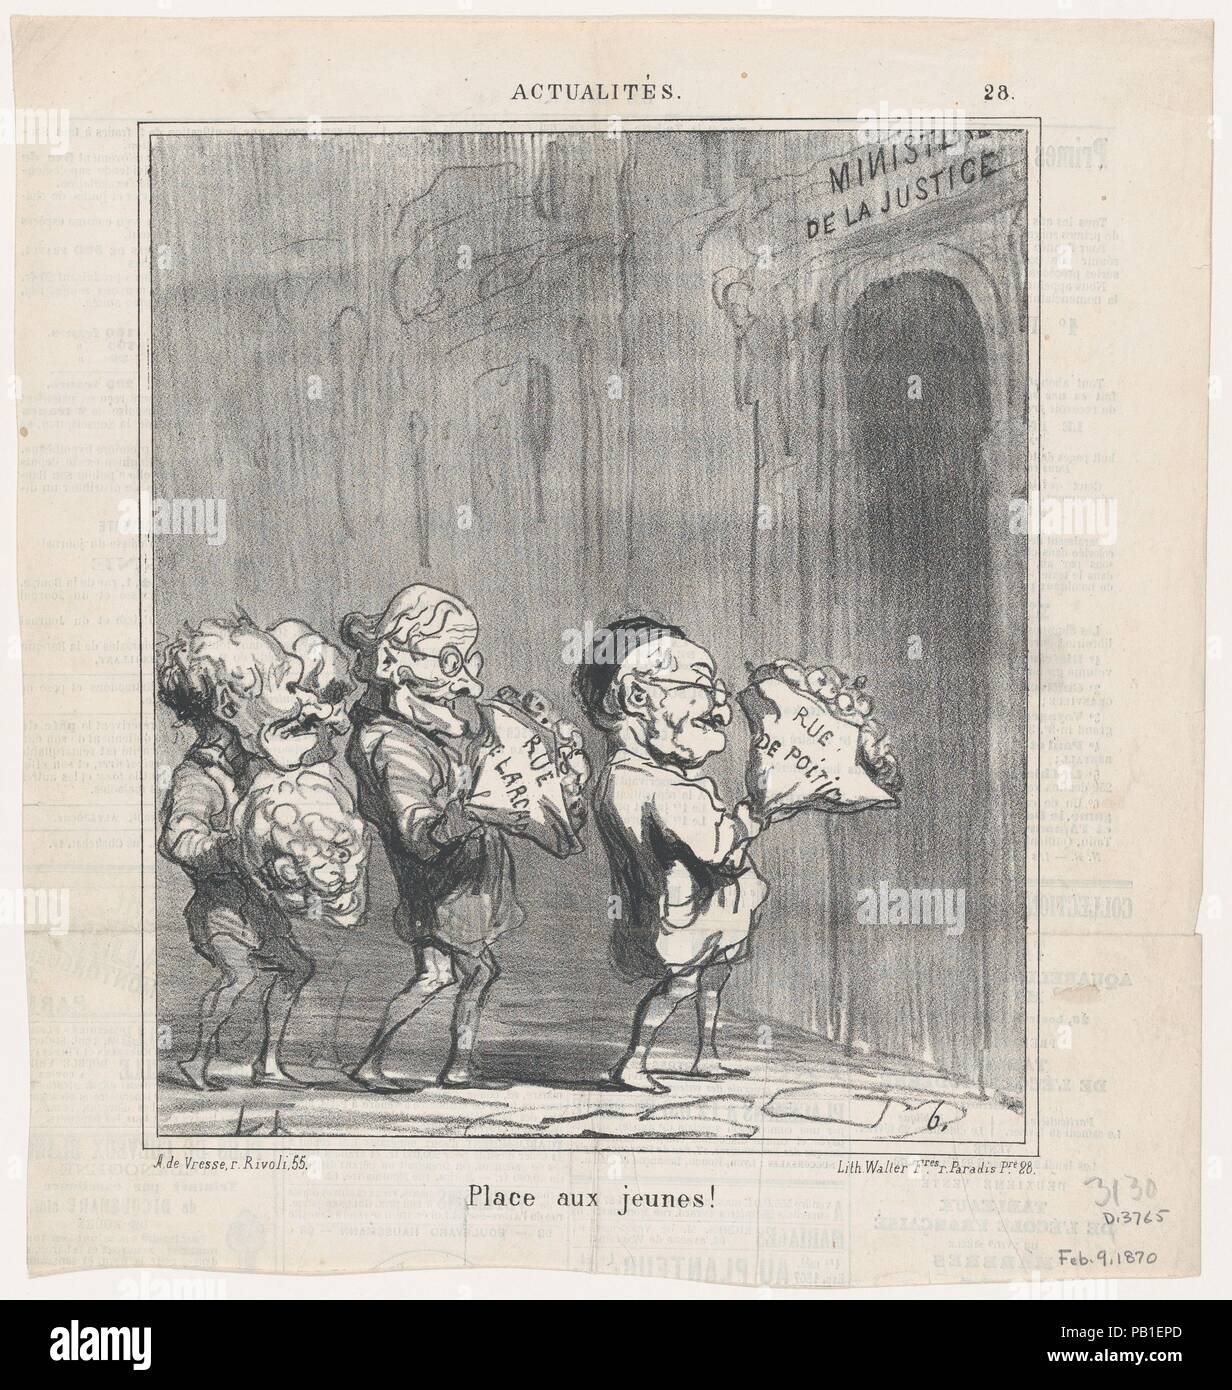 Make room for the young!, from 'News of the day,' published in Le Charivari, February 9, 1870. Artist: Honoré Daumier (French, Marseilles 1808-1879 Valmondois). Dimensions: Image: 9 5/16 × 8 1/16 in. (23.6 × 20.4 cm)  Sheet: 11 9/16 × 10 13/16 in. (29.4 × 27.5 cm). Printer: Walter Frères. Publisher: Arnaud de Vresse. Series/Portfolio: 'News of the day' (Actualités). Subject: Marie Joseph Louis Adolphe Thiers (French, Marseille 1797-1877 Saint-Germain-en-Laye). Date: February 9, 1870. Museum: Metropolitan Museum of Art, New York, USA. Stock Photo